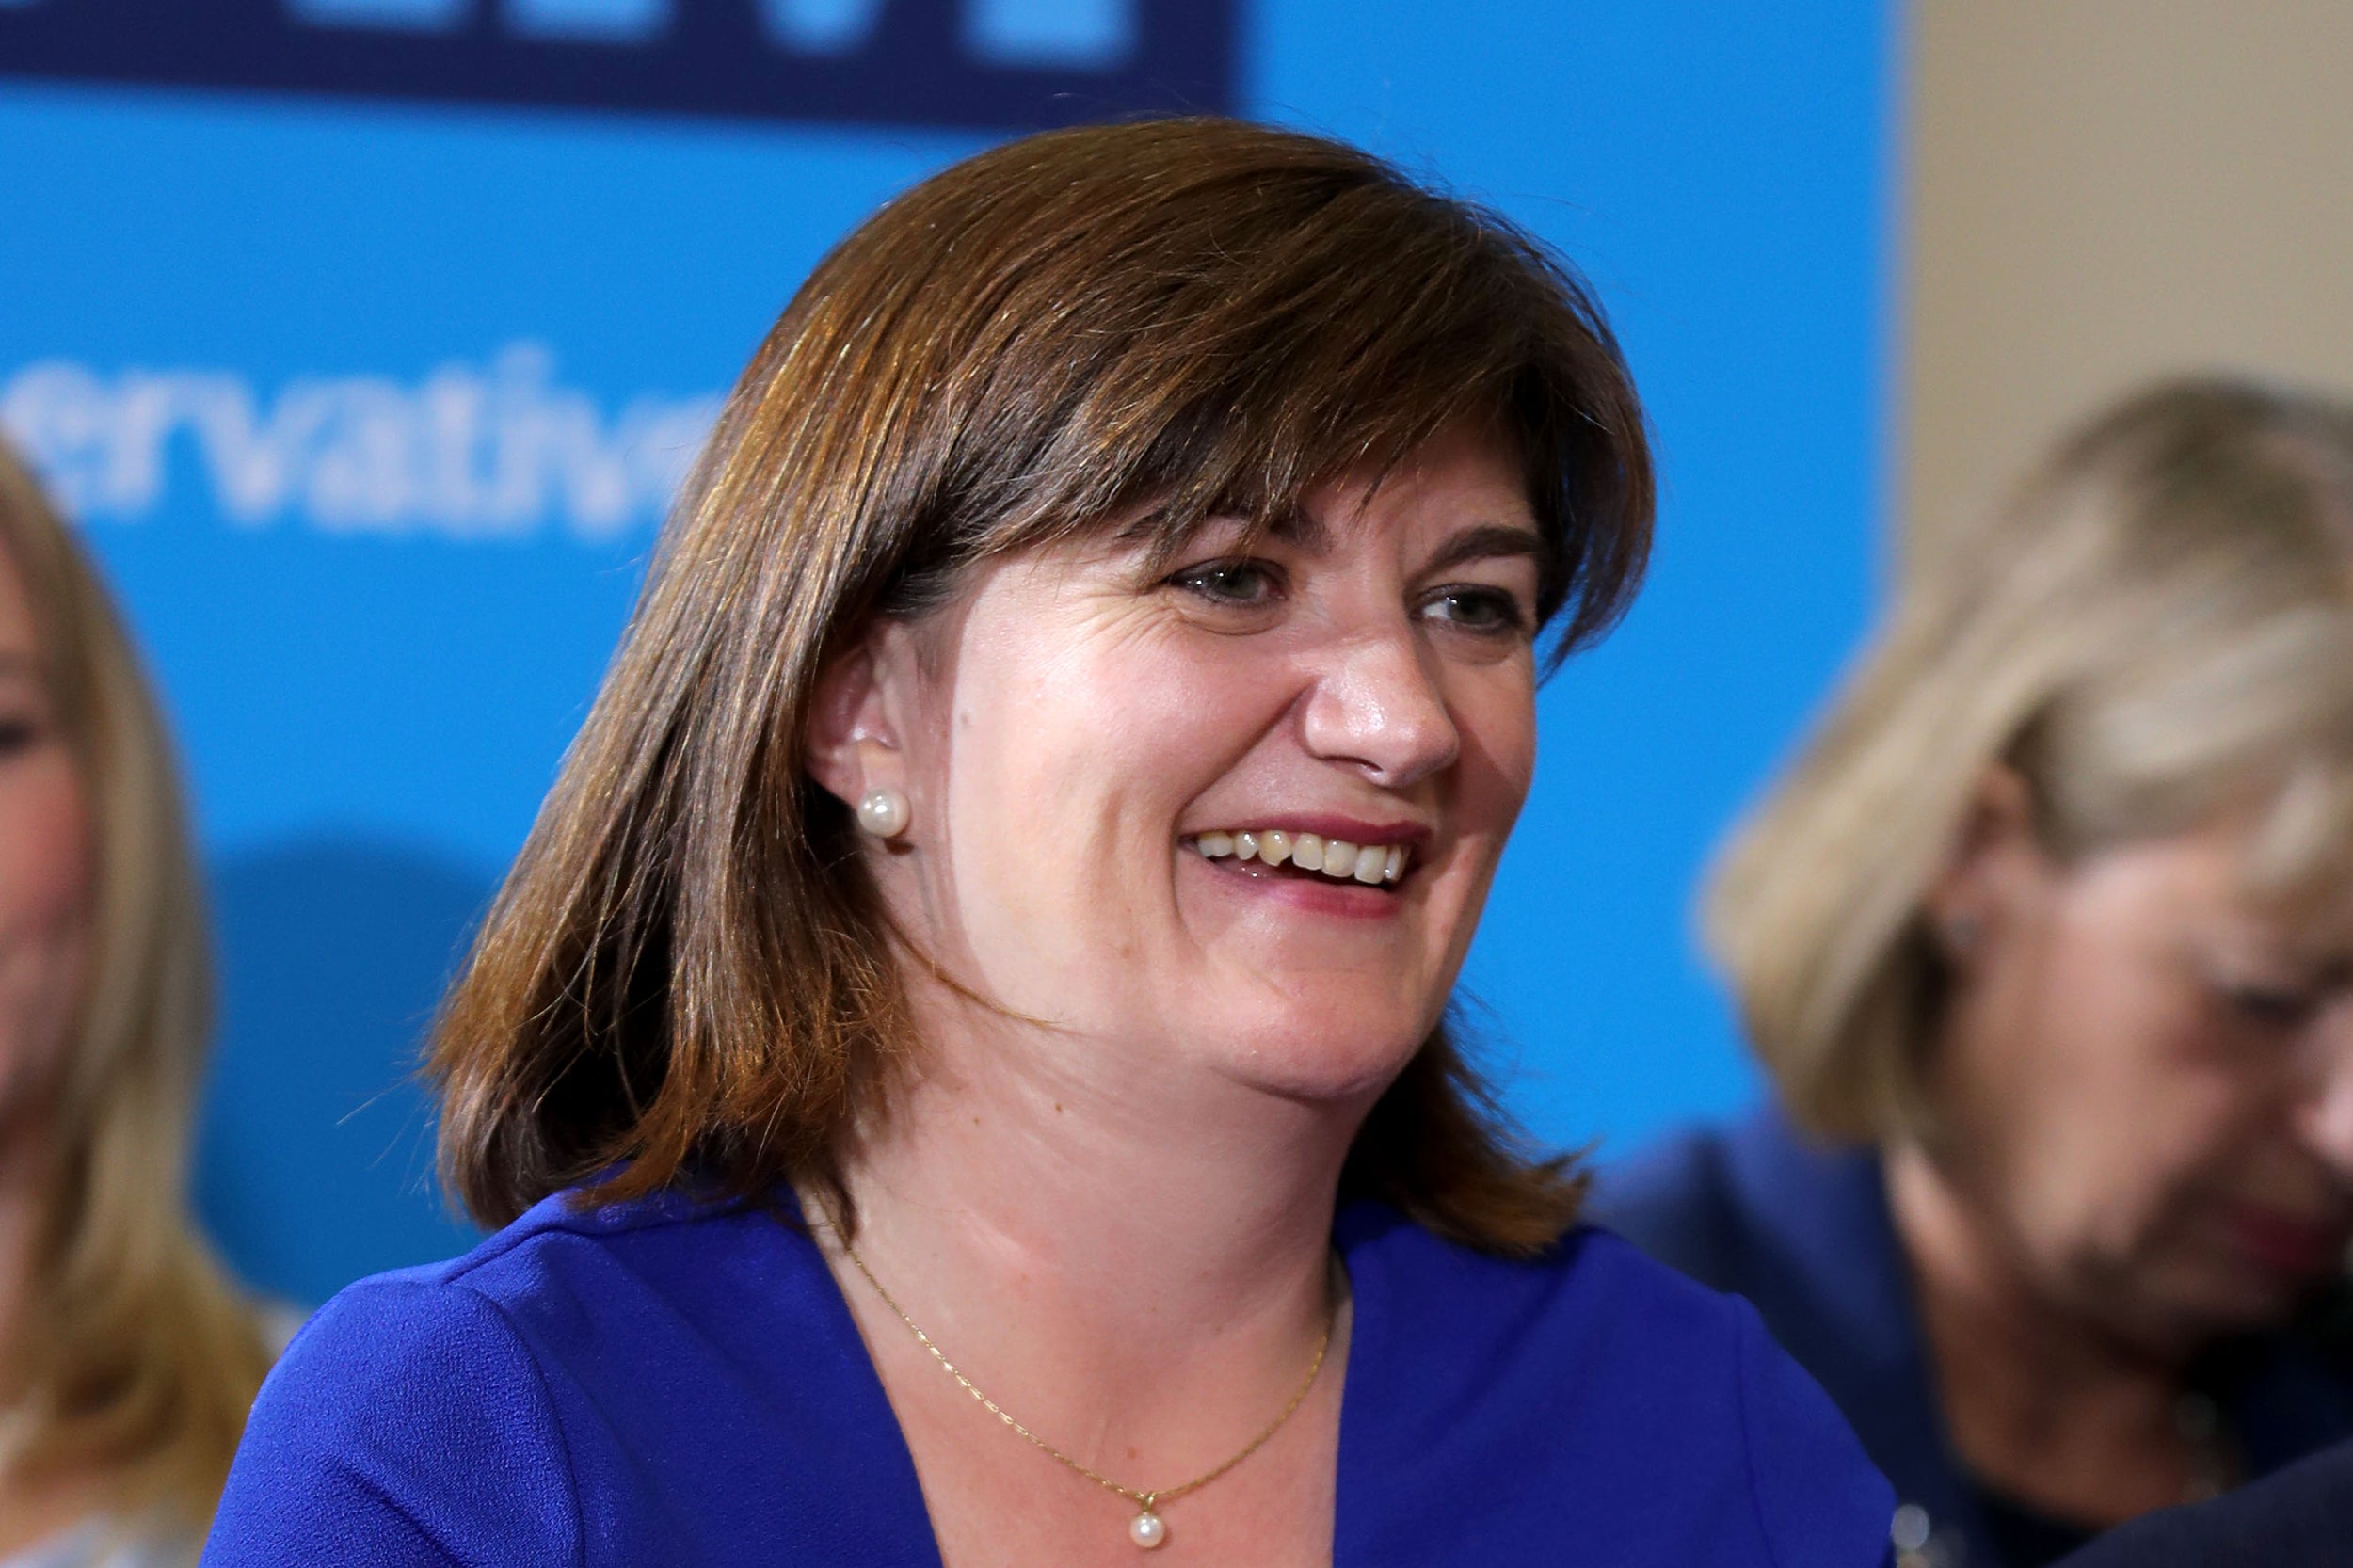 Nicky Morgan is the new chair of the Treasury Committee